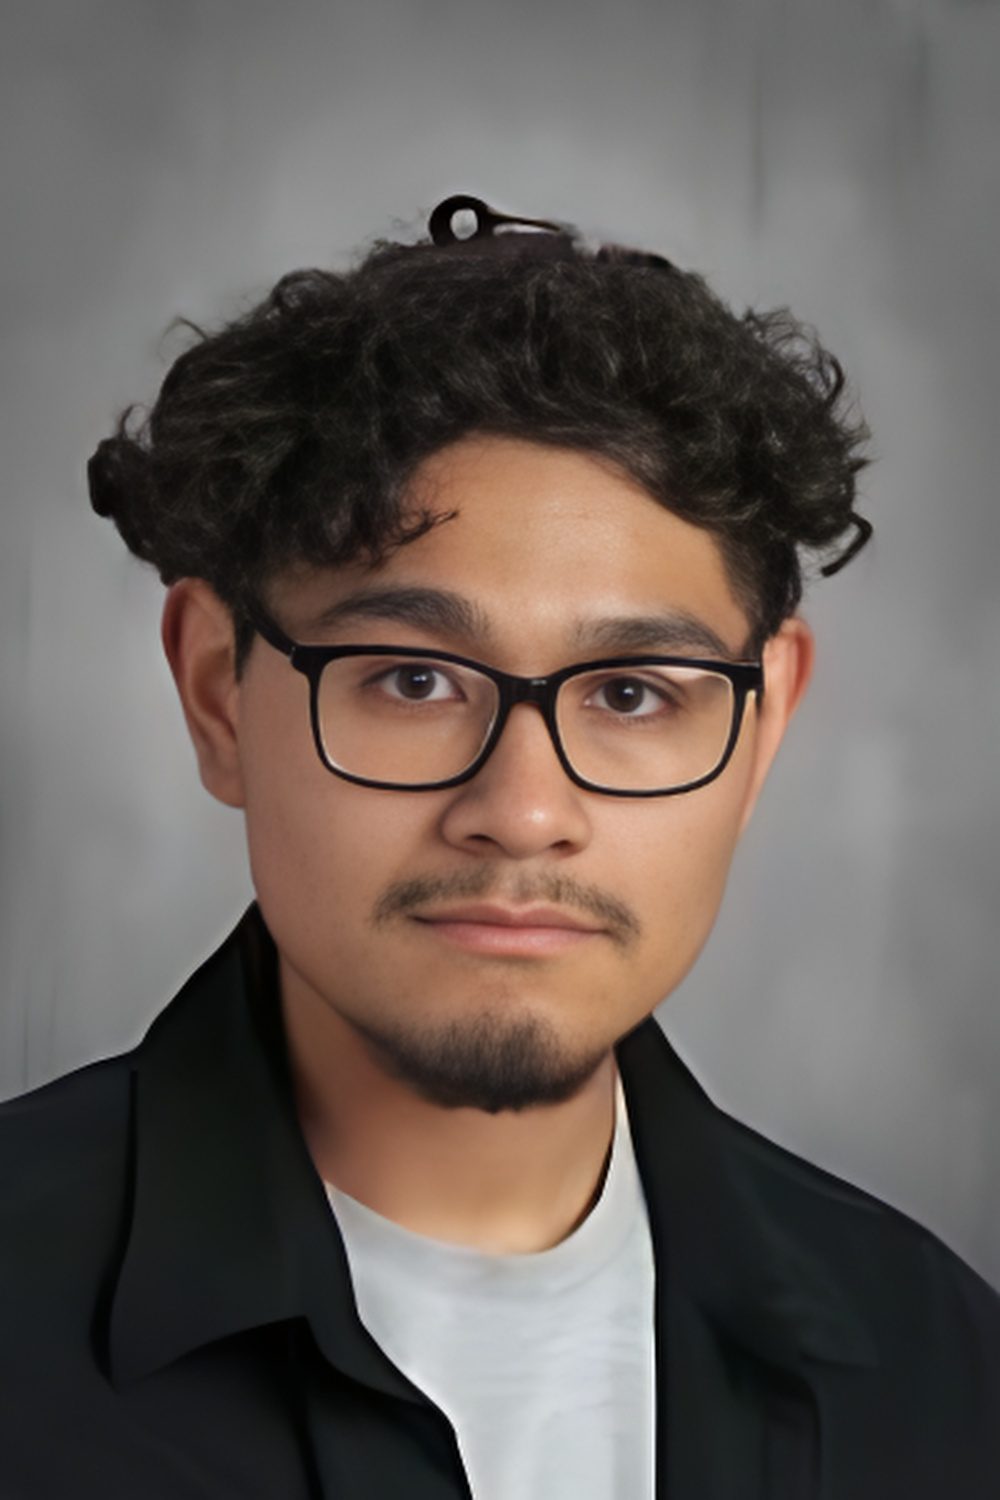 This photo is a headshot of Ernesto Sosa, a student at Mansueto High School. He is a young Latine man with short curly hair and glasses. In this photo, he is wearing a light gray t-shirt underneath a black button-up.